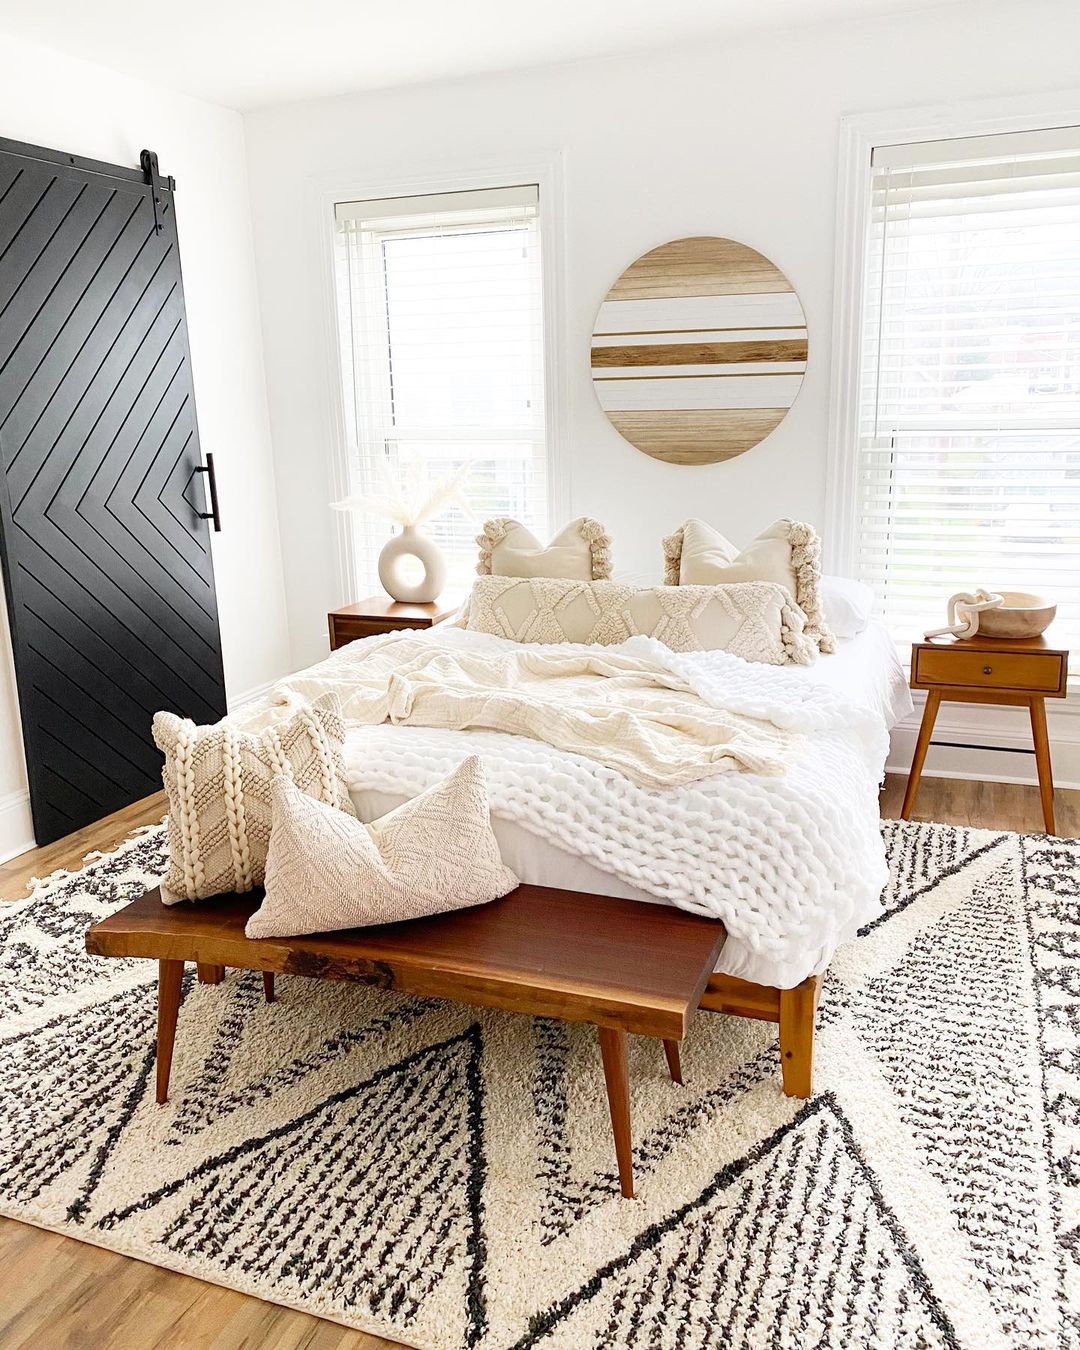 Bright boho bedroom with black and white patterned rug. Photo by Instagram User @modernly_you